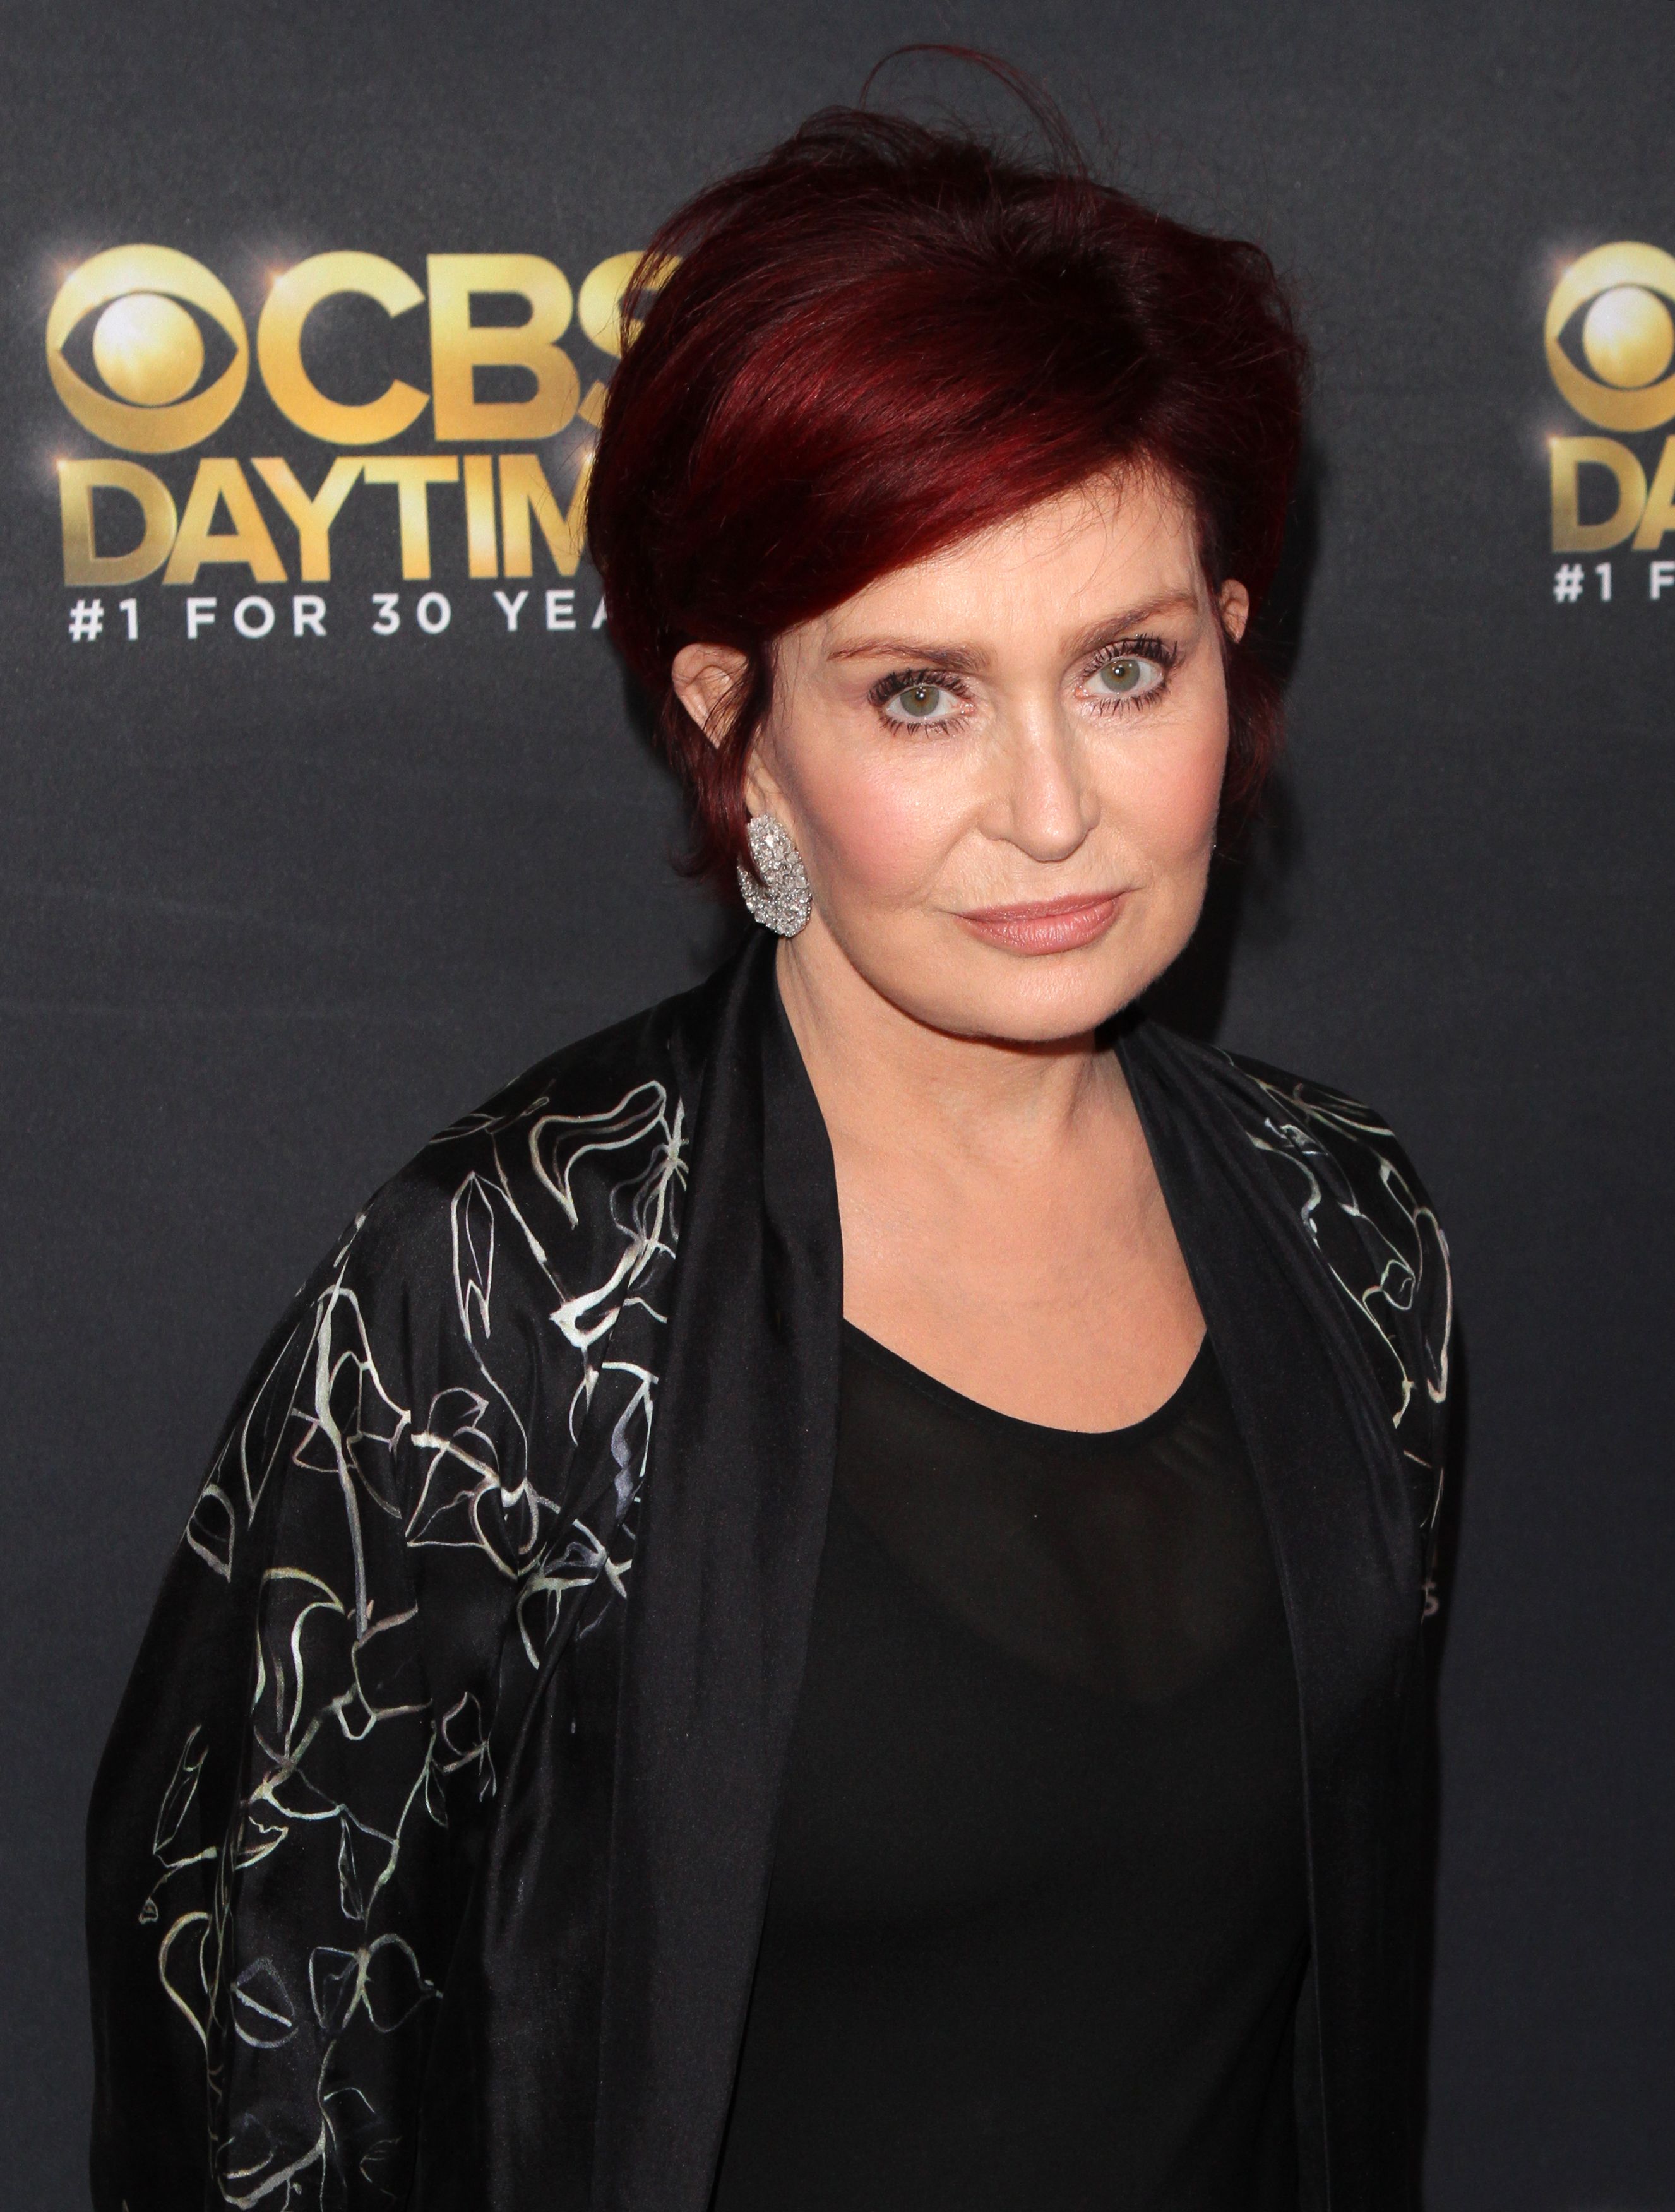 Sharon Osbourne attends the CBS Daytime Emmy after party at Pasadena Civic Auditorium on April 30, 2017. | Photo: Getty Images